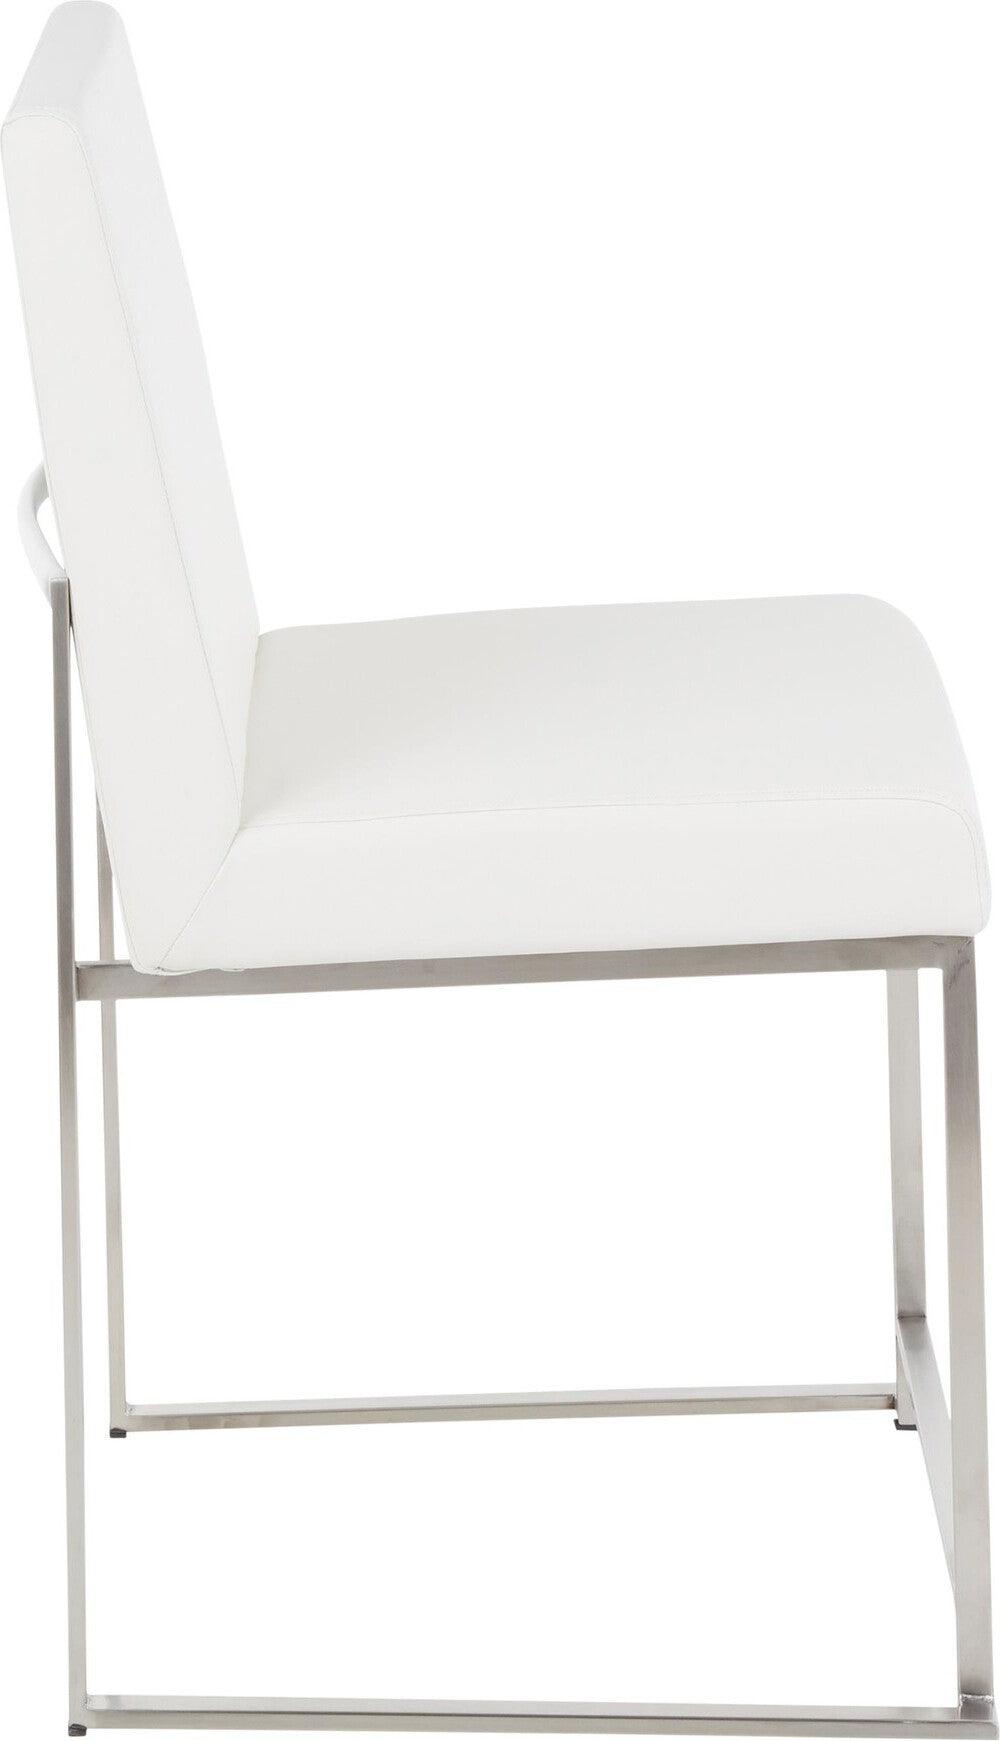 Lumisource Dining Chairs - High Back Fuji Contemporary Dining Chair in Stainless Steel and White Faux Leather (Set of 2)